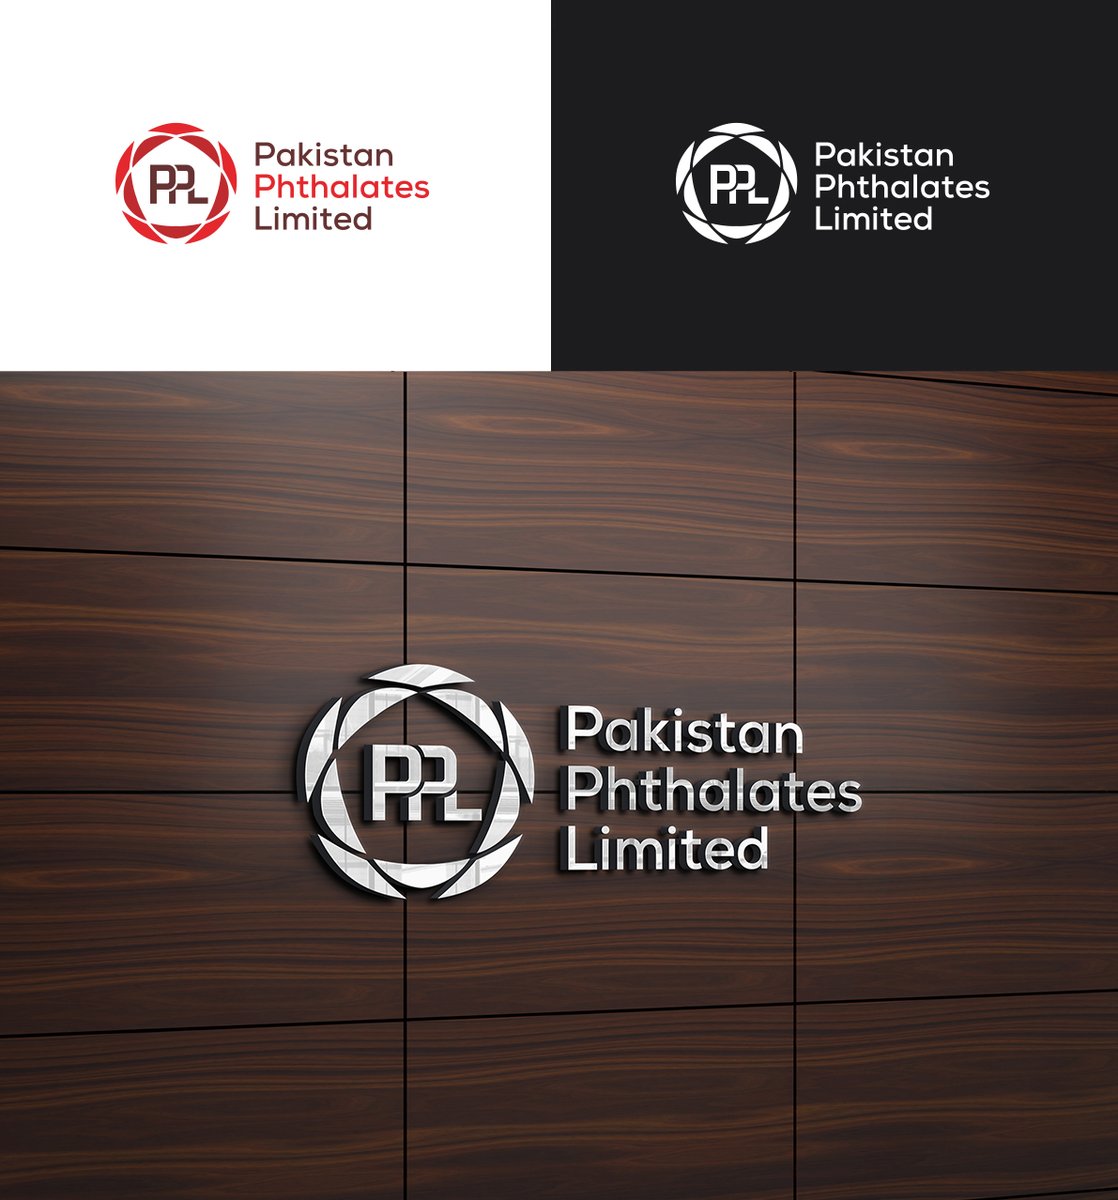 ✅ Boundless Technologies launch a new logo design for one of our esteemed clients Pakistan Phthalates Limited! 📞 Contact us: wa.me/923453133668 #logodesign #logodesigncompany #PakistanPhthalatesLimited